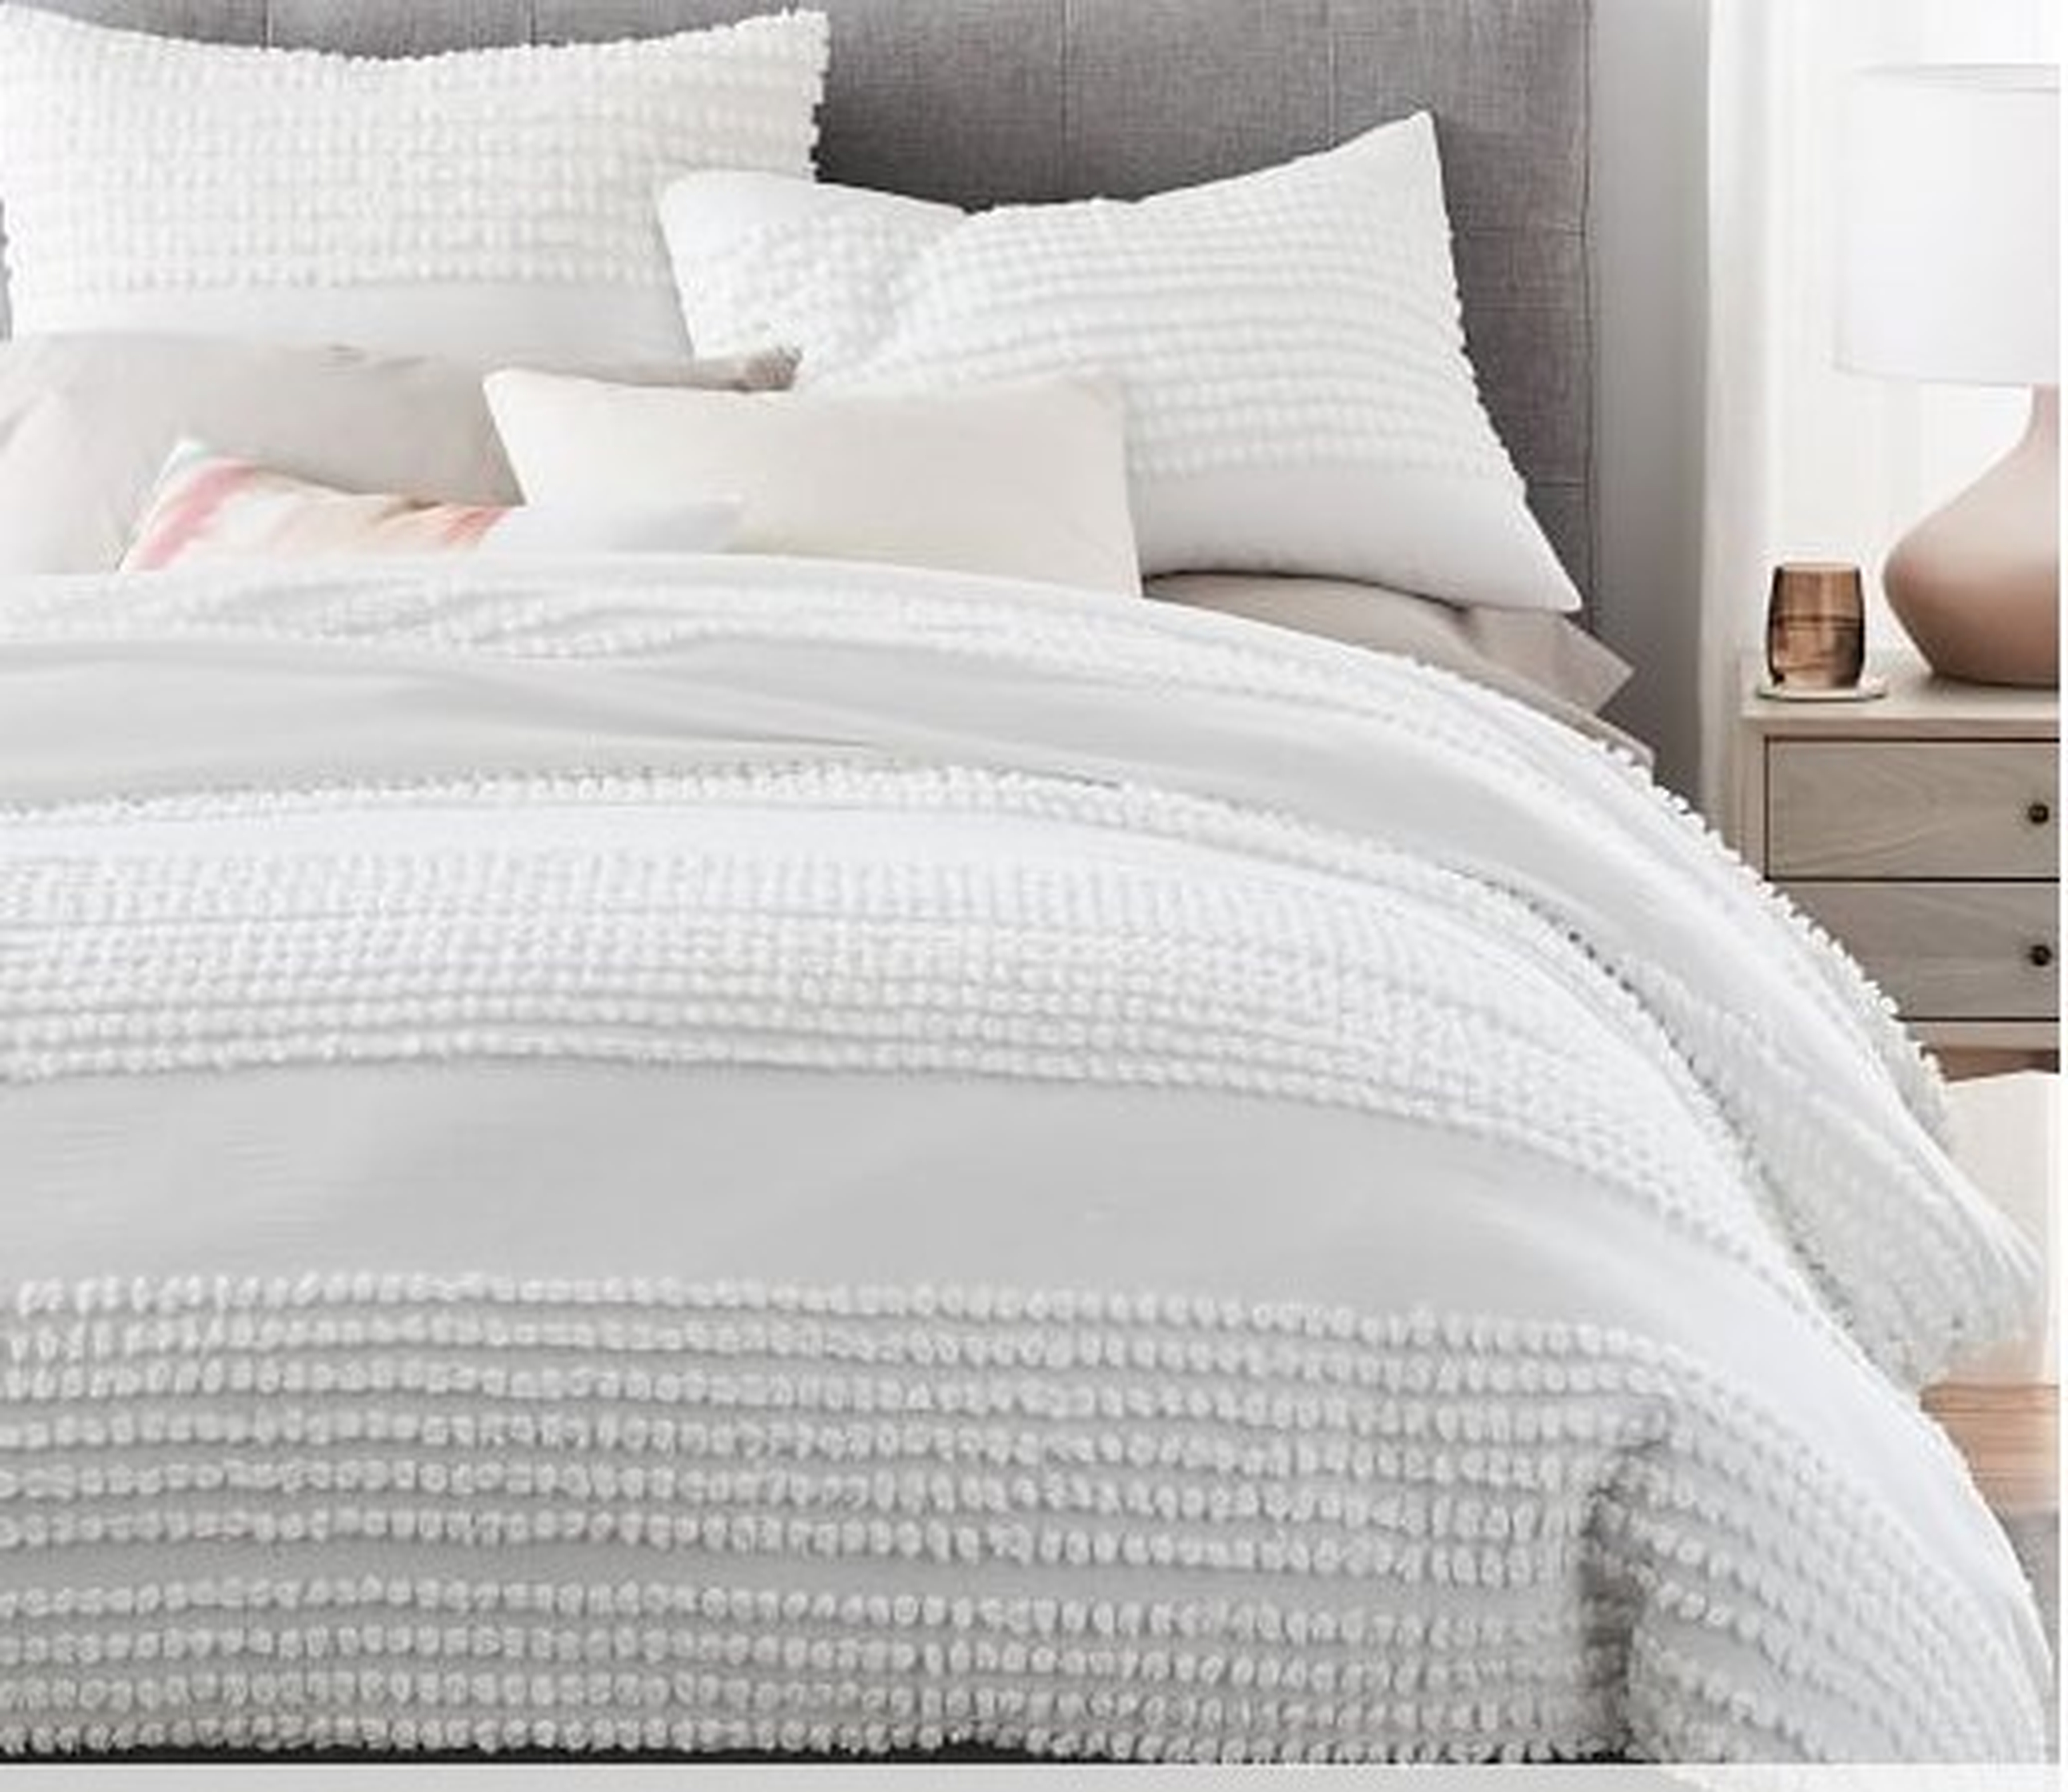 Candlewick Duvet Cover, King/Cal. King, Stone White - West Elm